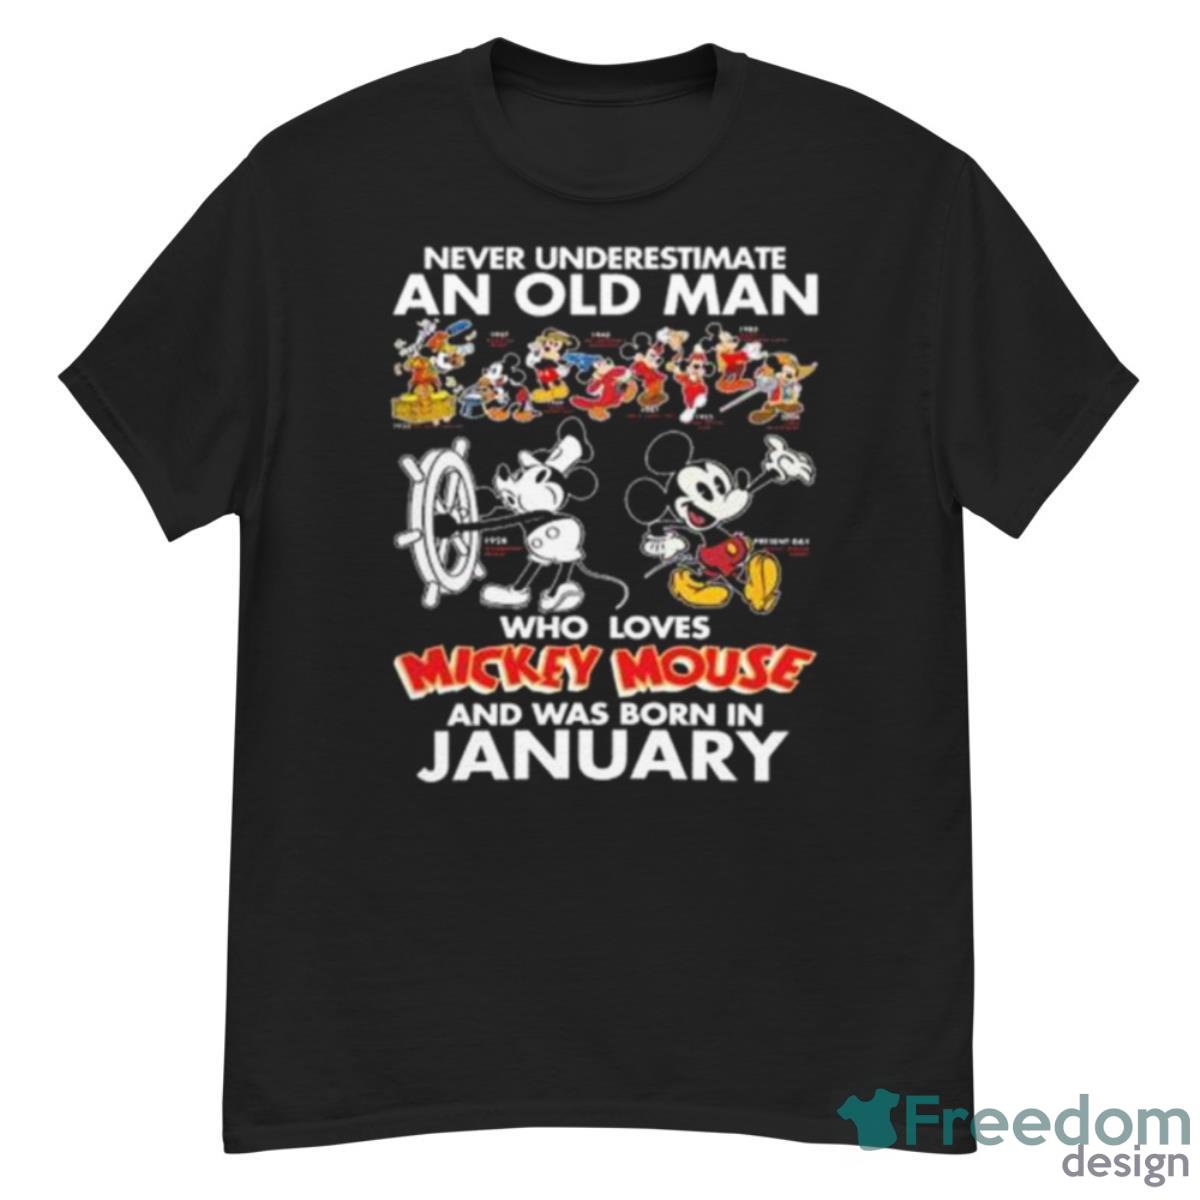 Never Underestimate An Old Man Who Loves Mickey Mouse And Was Born In January Shirt - G500 Men’s Classic T-Shirt